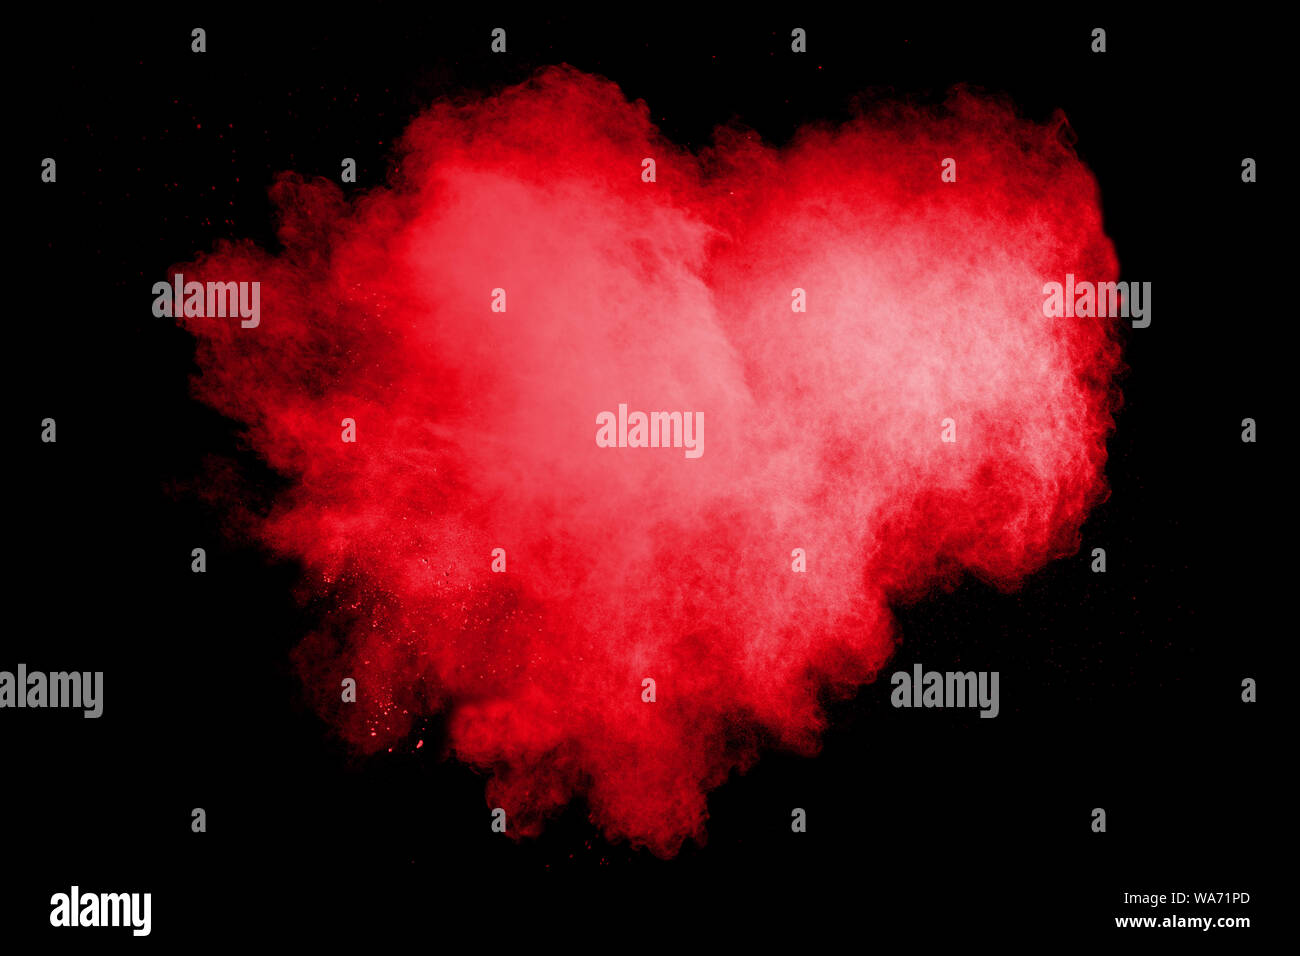 Red powder explosion cloud on black background. Freeze motion of red color dust  particles splashing. Stock Photo